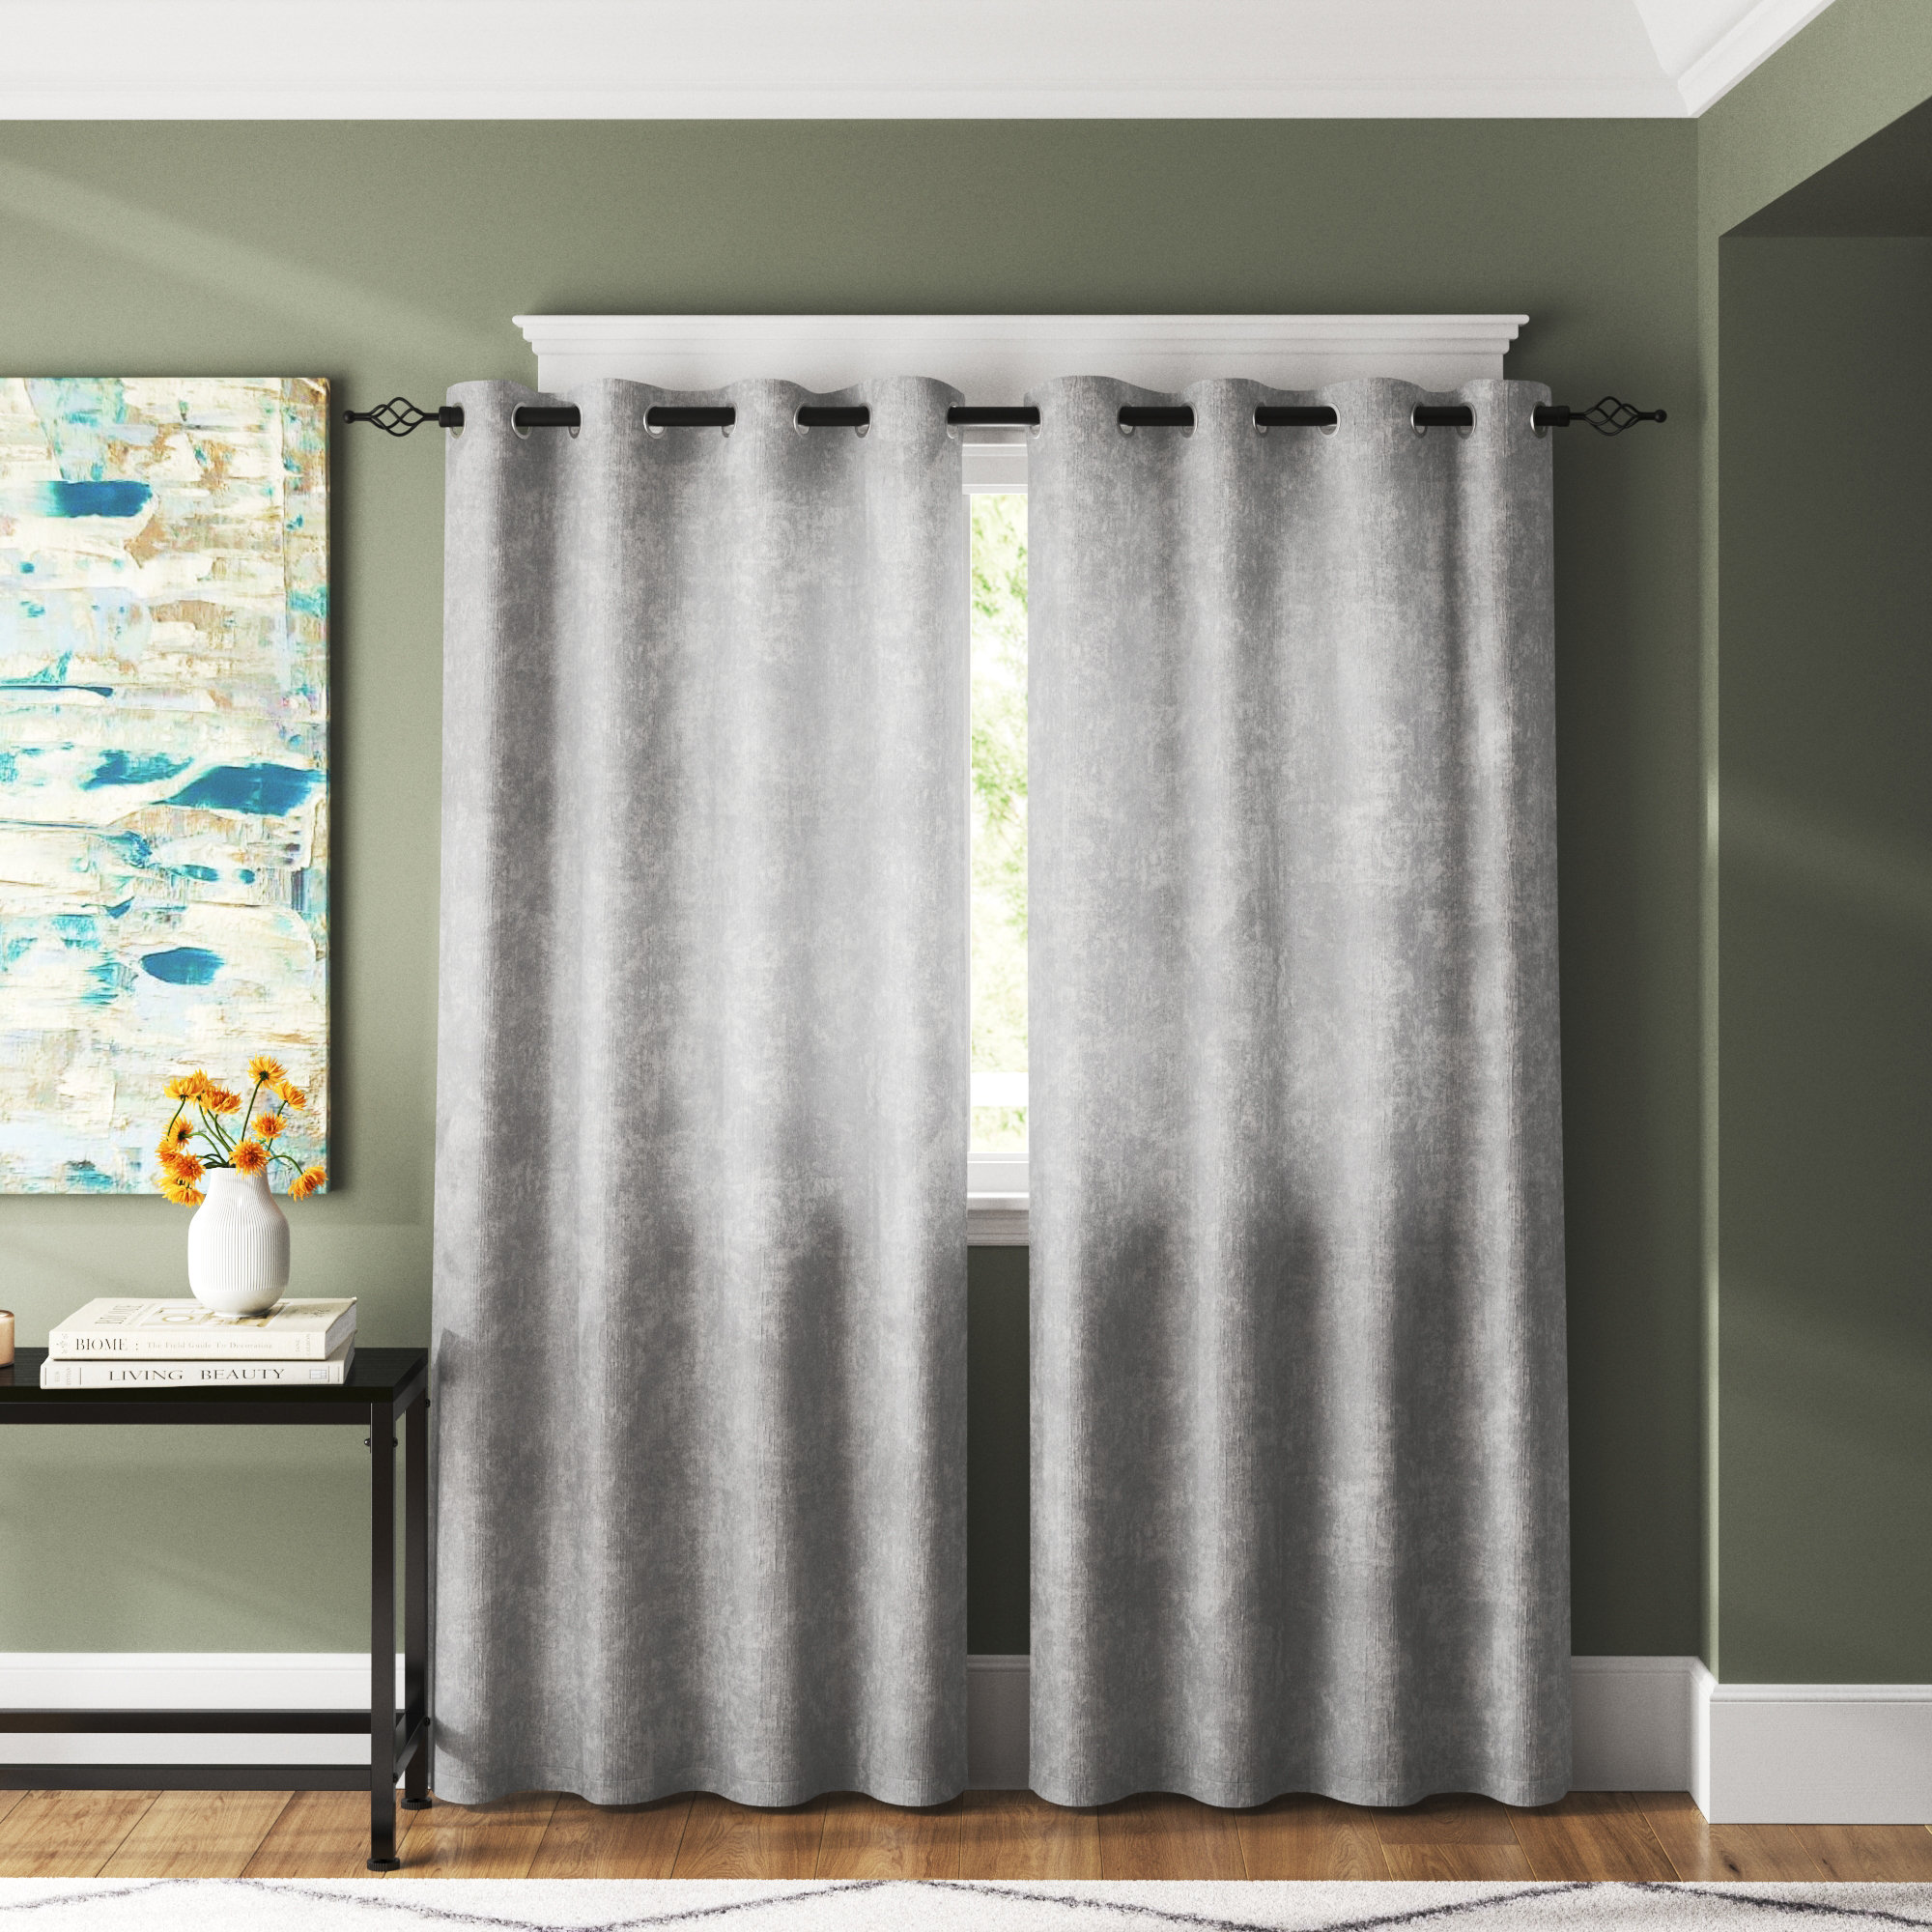 Jayla Solid Color Blackout Thermal Grommet Curtain Panels (Set of 2) The Twillery Co. Size per Panel: 53 W x 84 L, Curtain Color: Grayish White